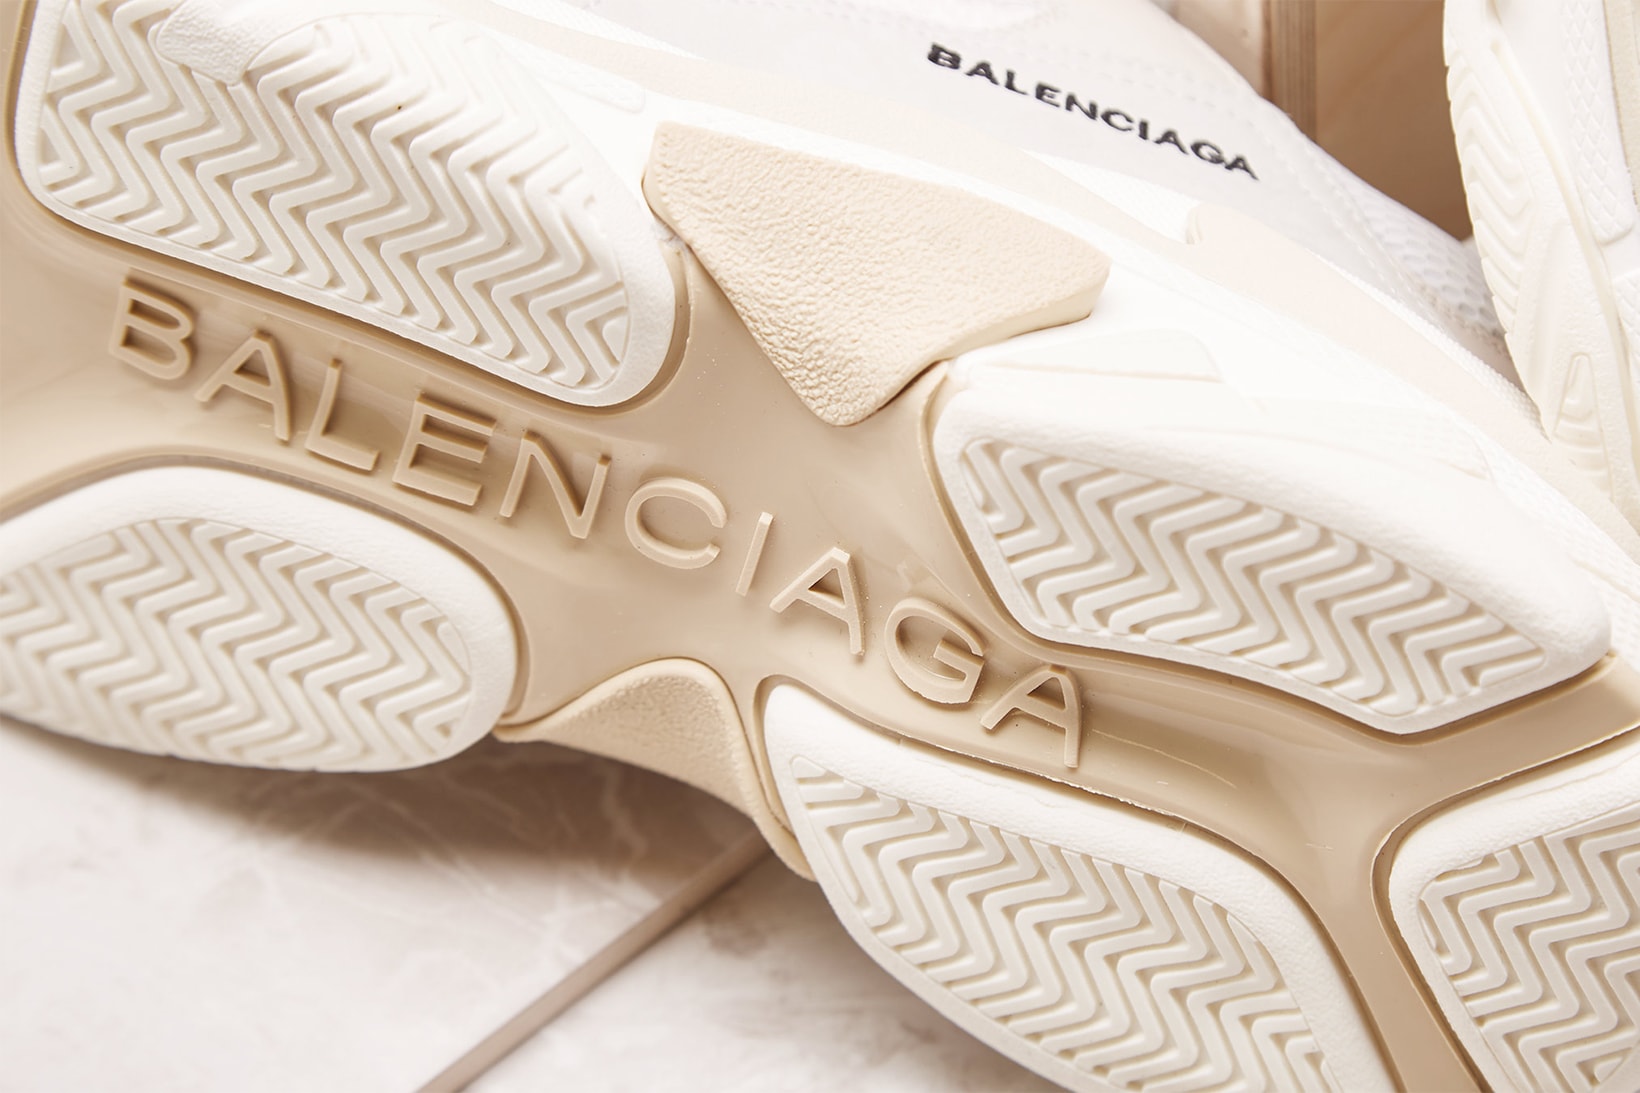 Balenciaga Triple S Cream 2017 October 30 Release Date Info Sneakers Shoes Footwear END Clothing Launches Drops Closer Look